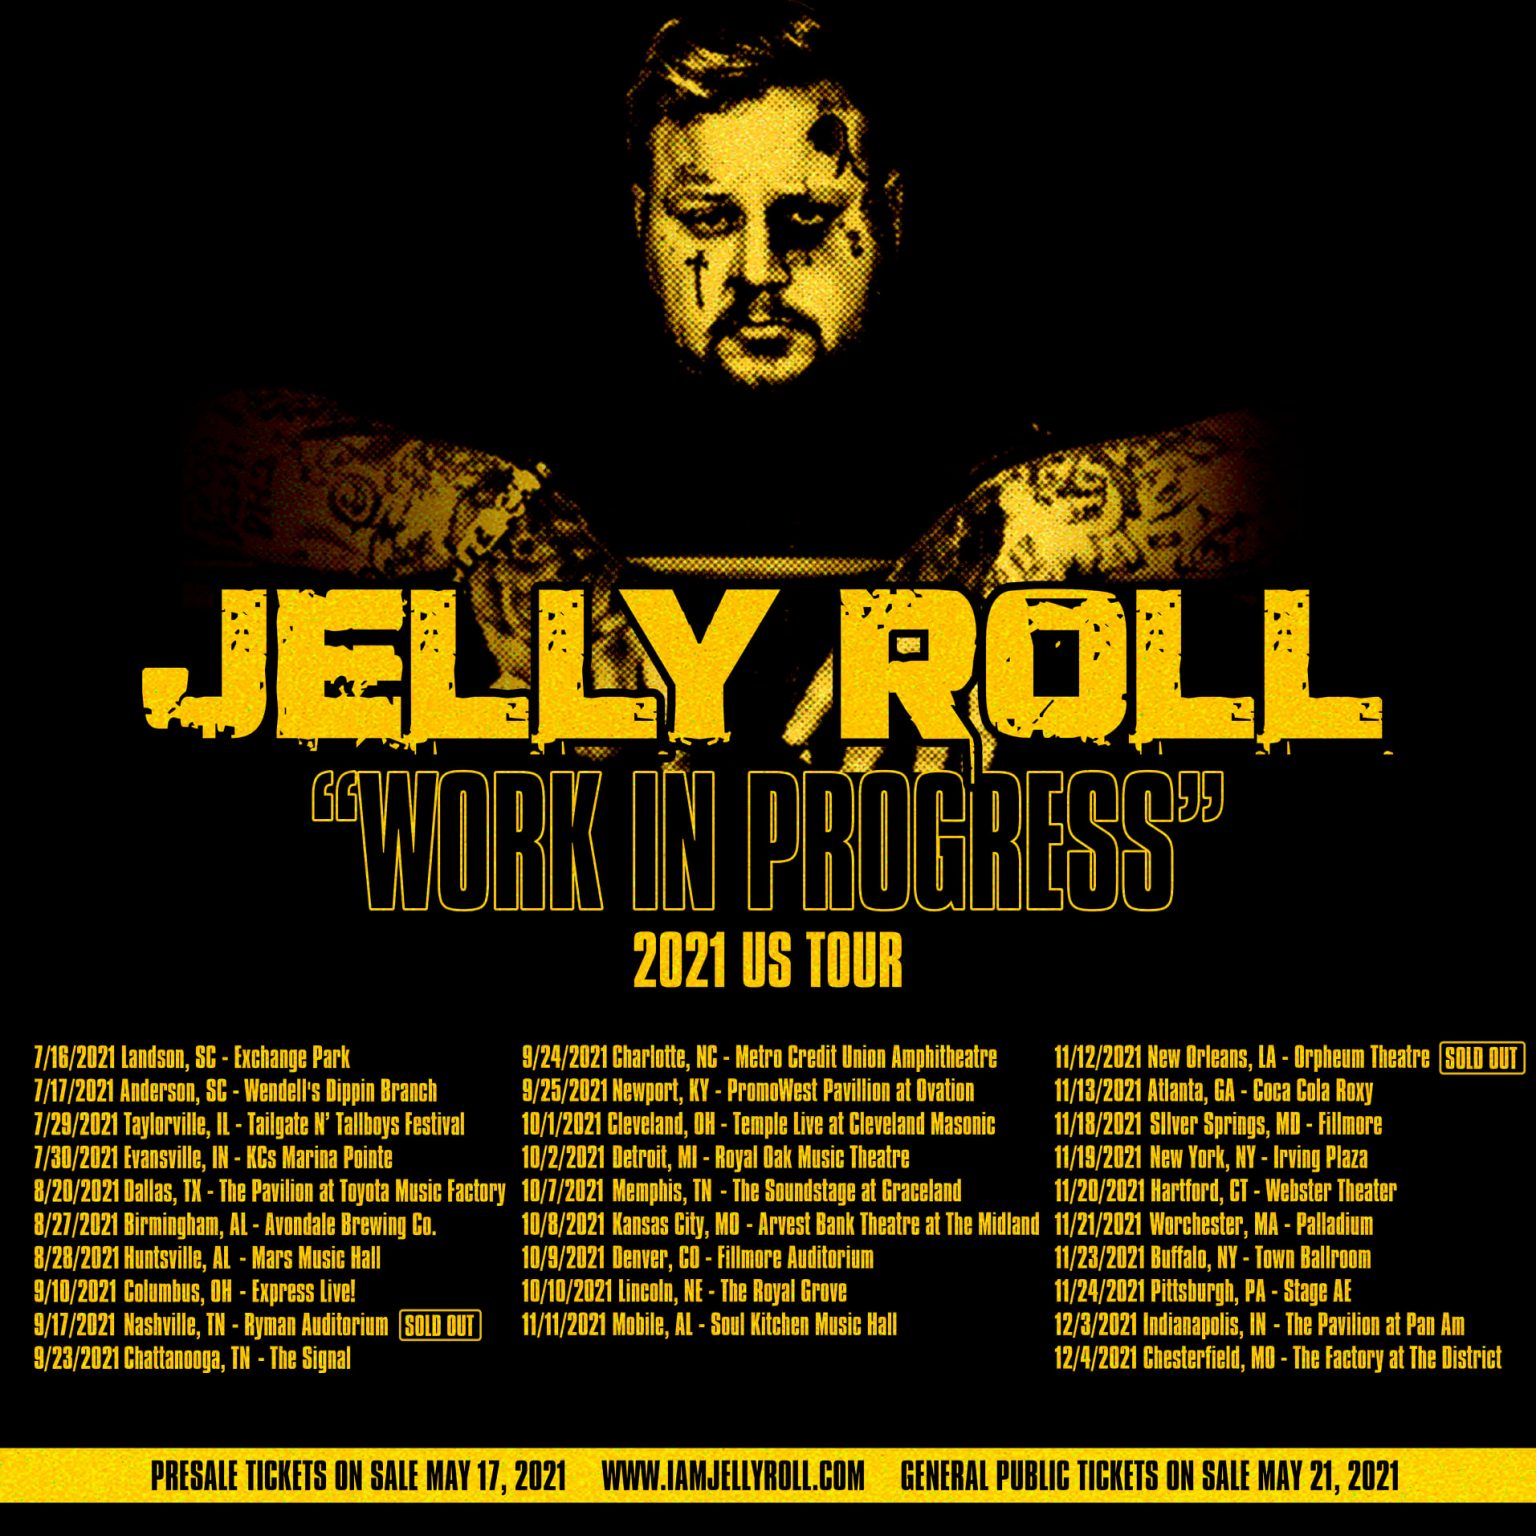 Jelly Roll Announces the Over 4 Month Long Tour “Work In Progress” From JulyDecember 2021